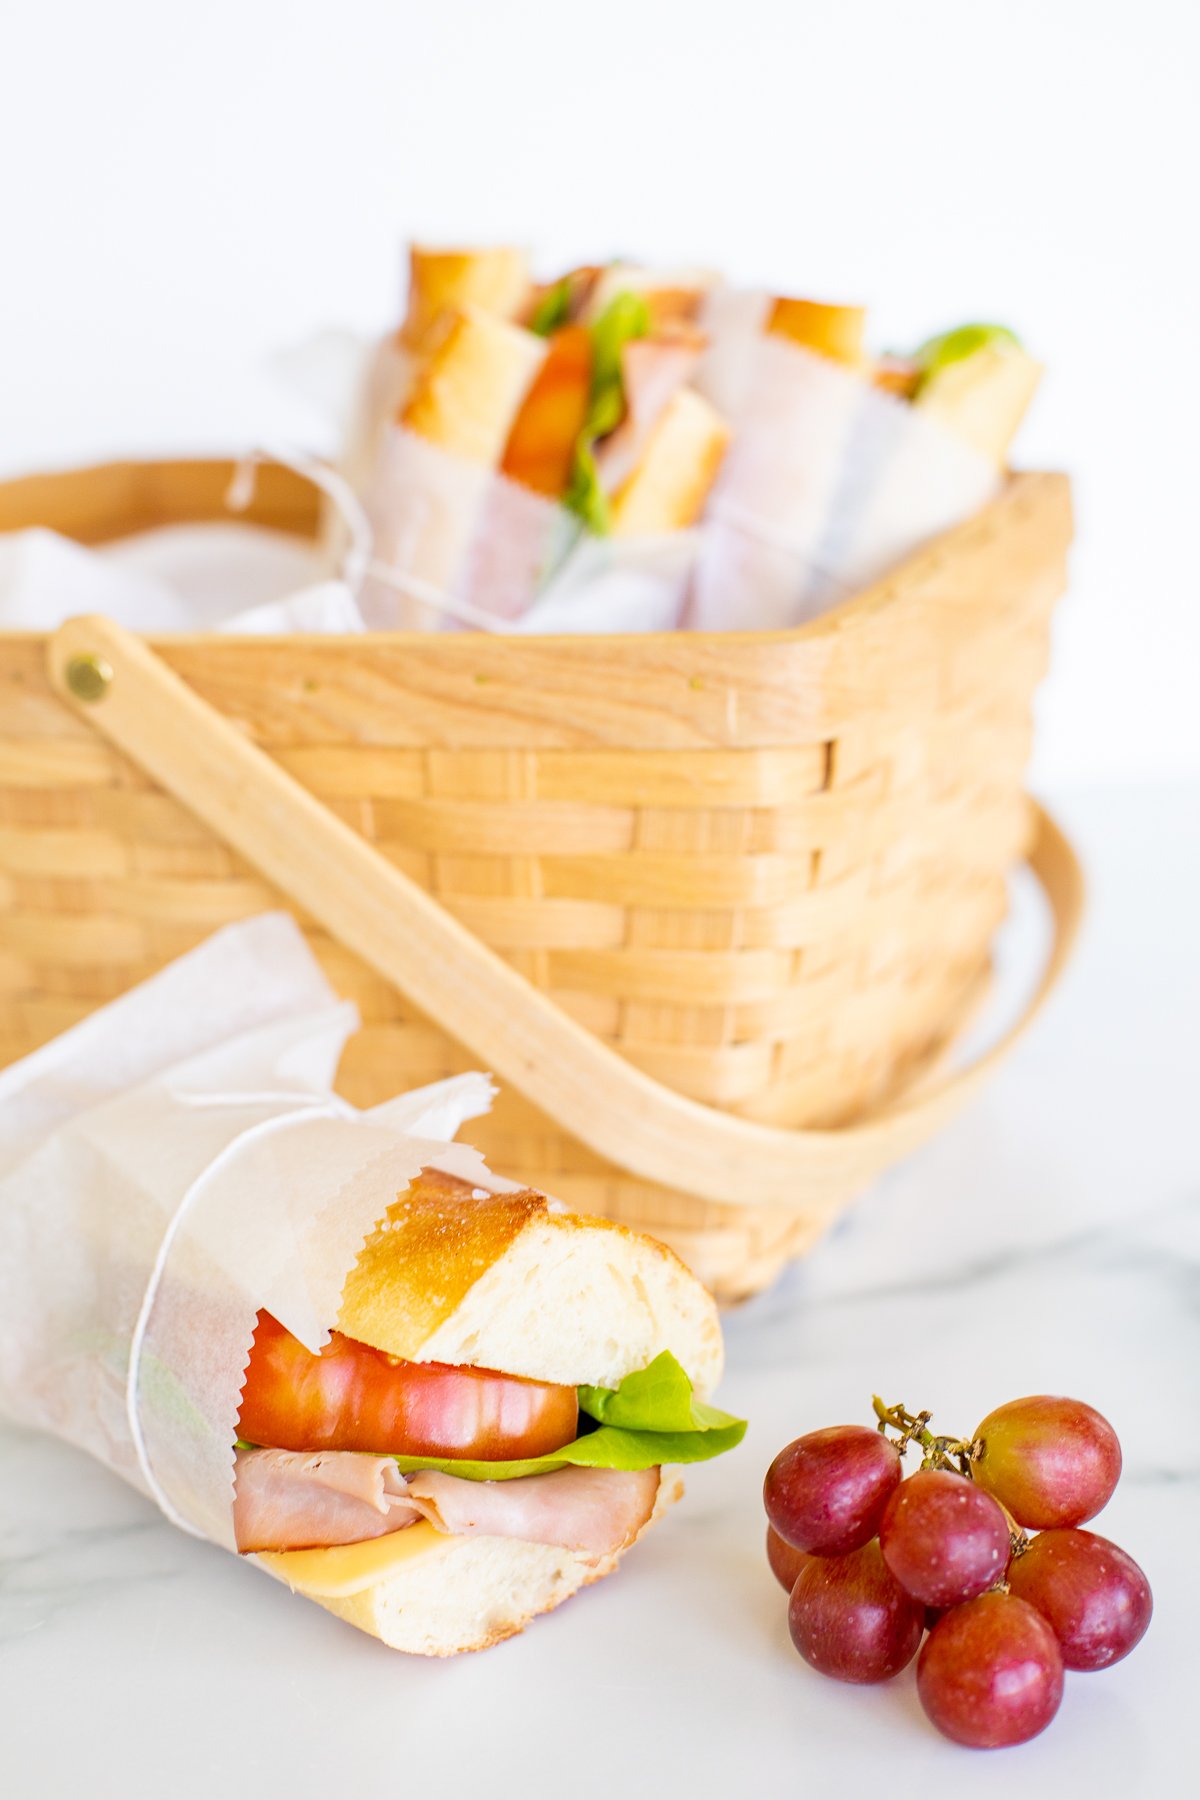 A picnic basket with wrapped sandwiches and a bunch of red grapes on a white surface.